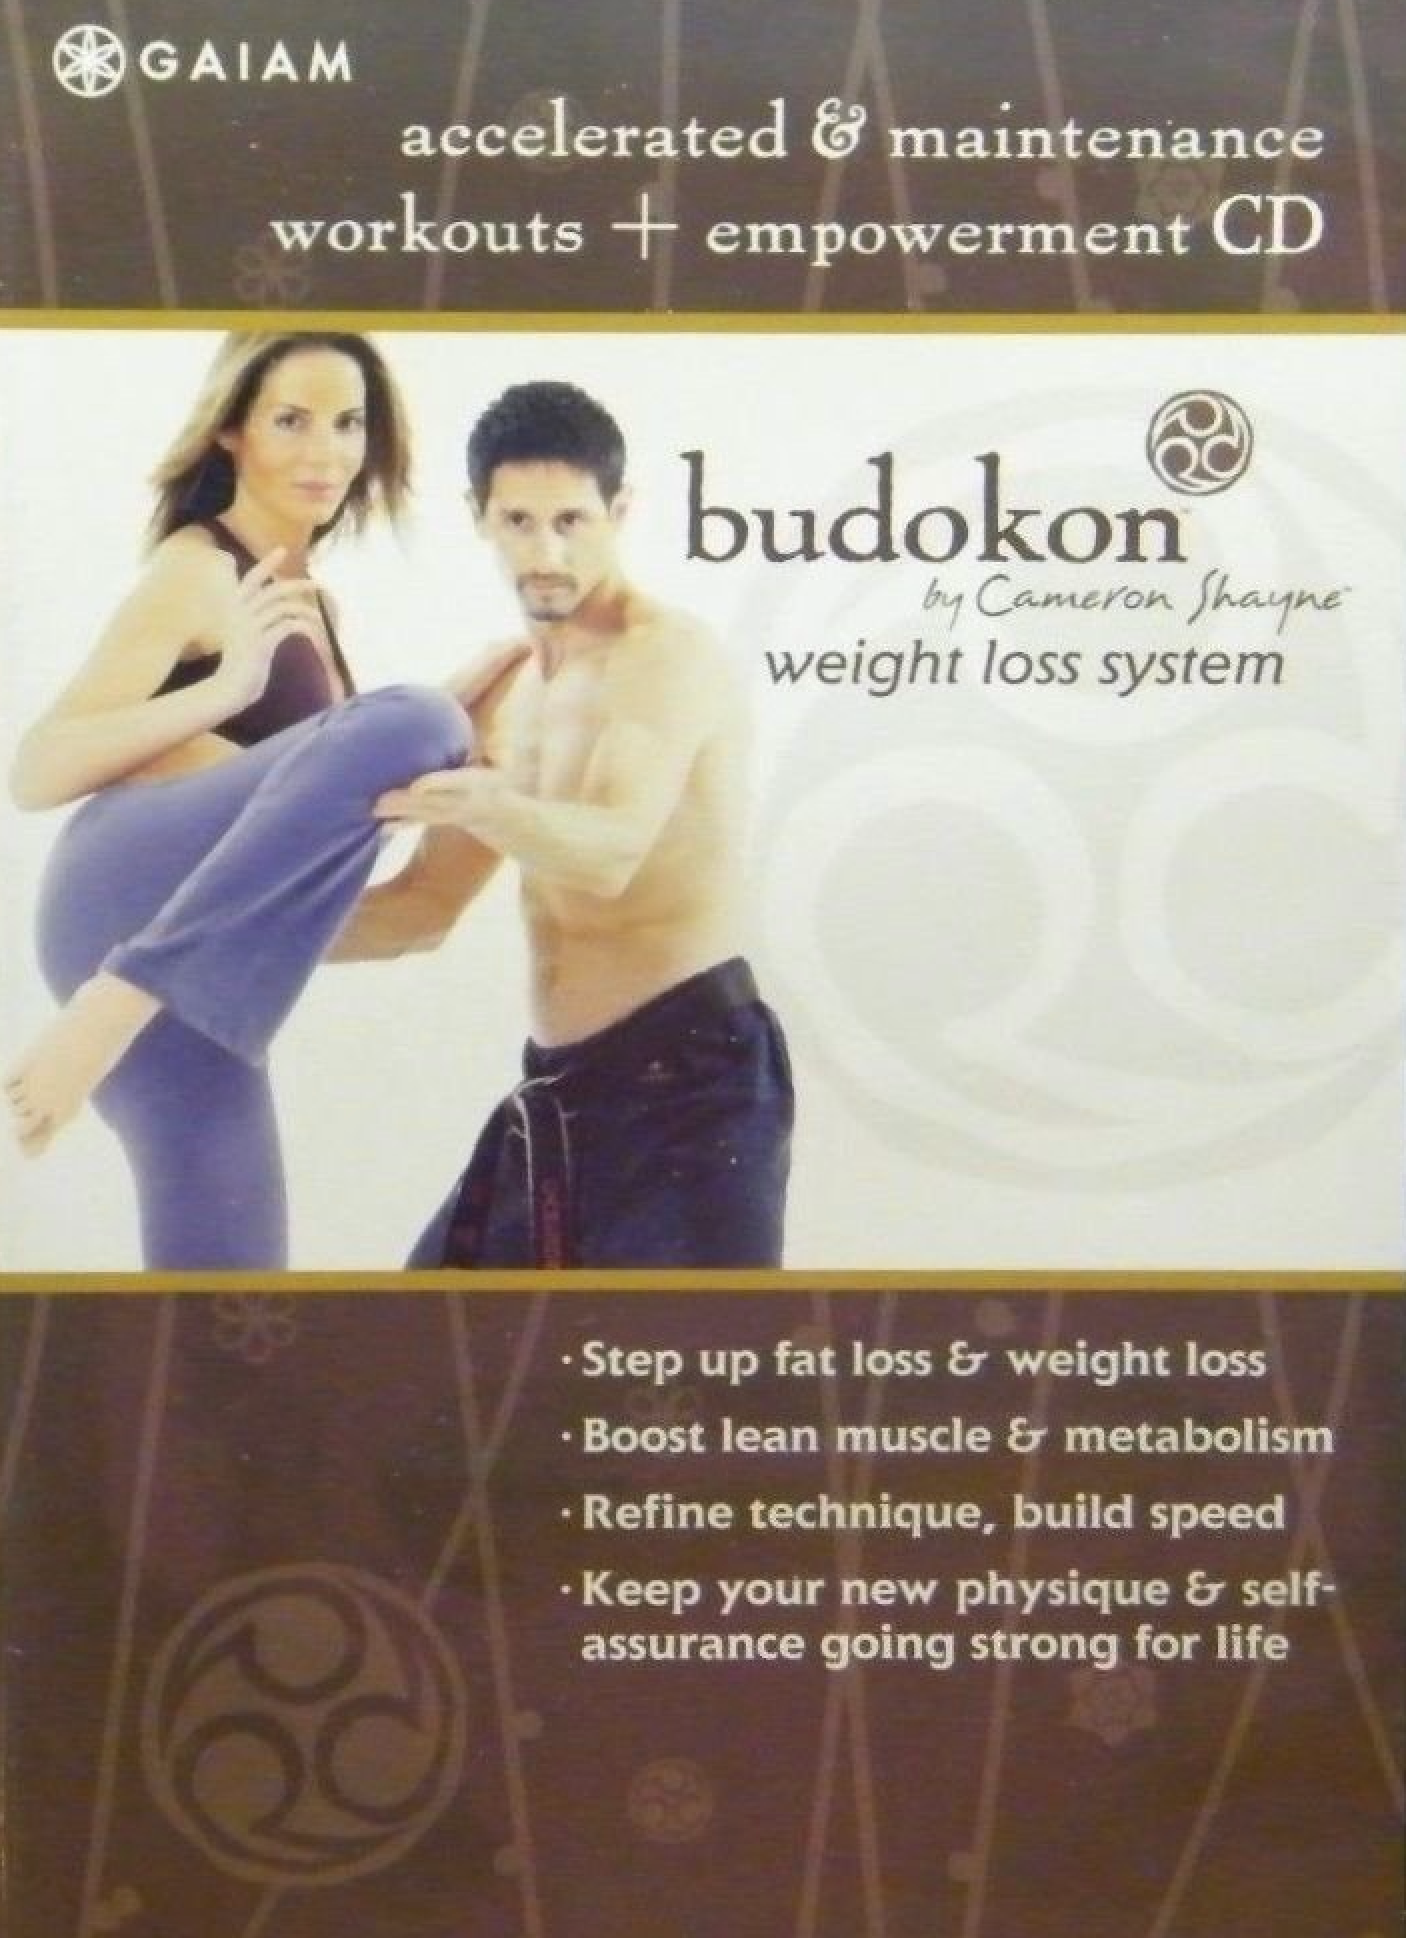 Budokon Weight Loss System: Accelerated & Maintain Workouts + Empowerment CD by Cameron Shayne (中古) 